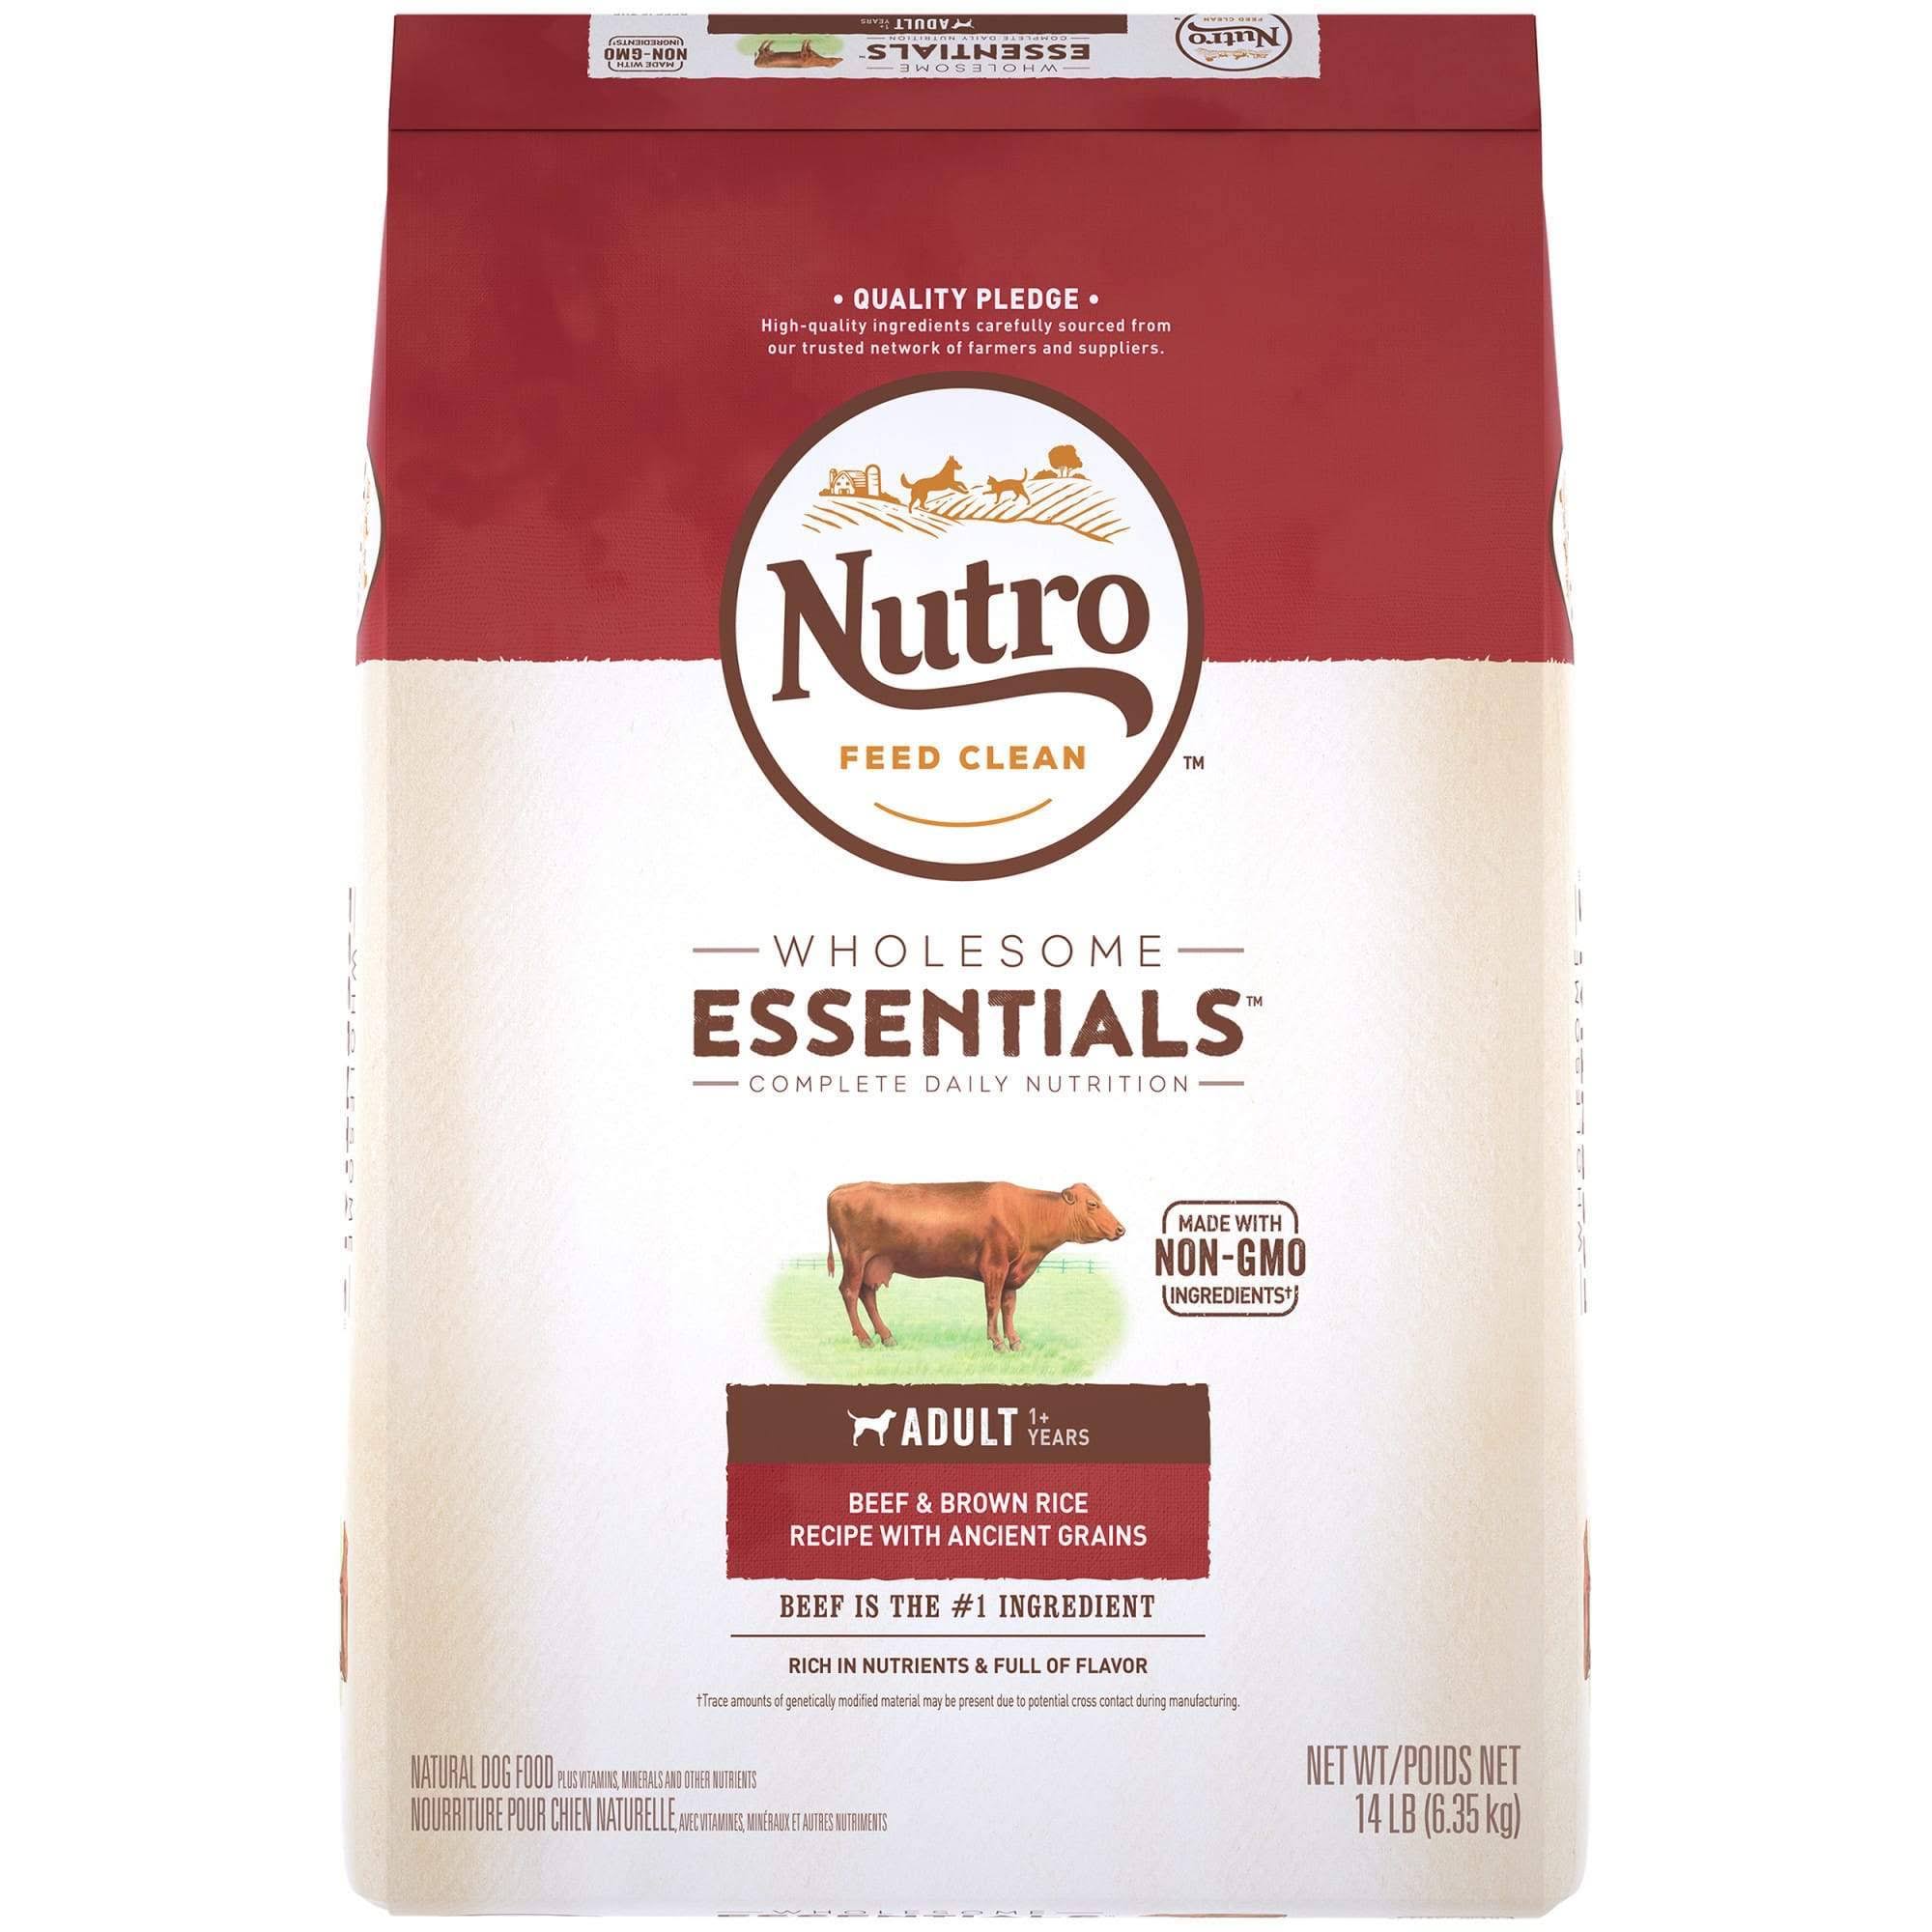 Nutro Wholesome Essentials Adult Dog Food Beef & Brown Rice -- 28 lbs